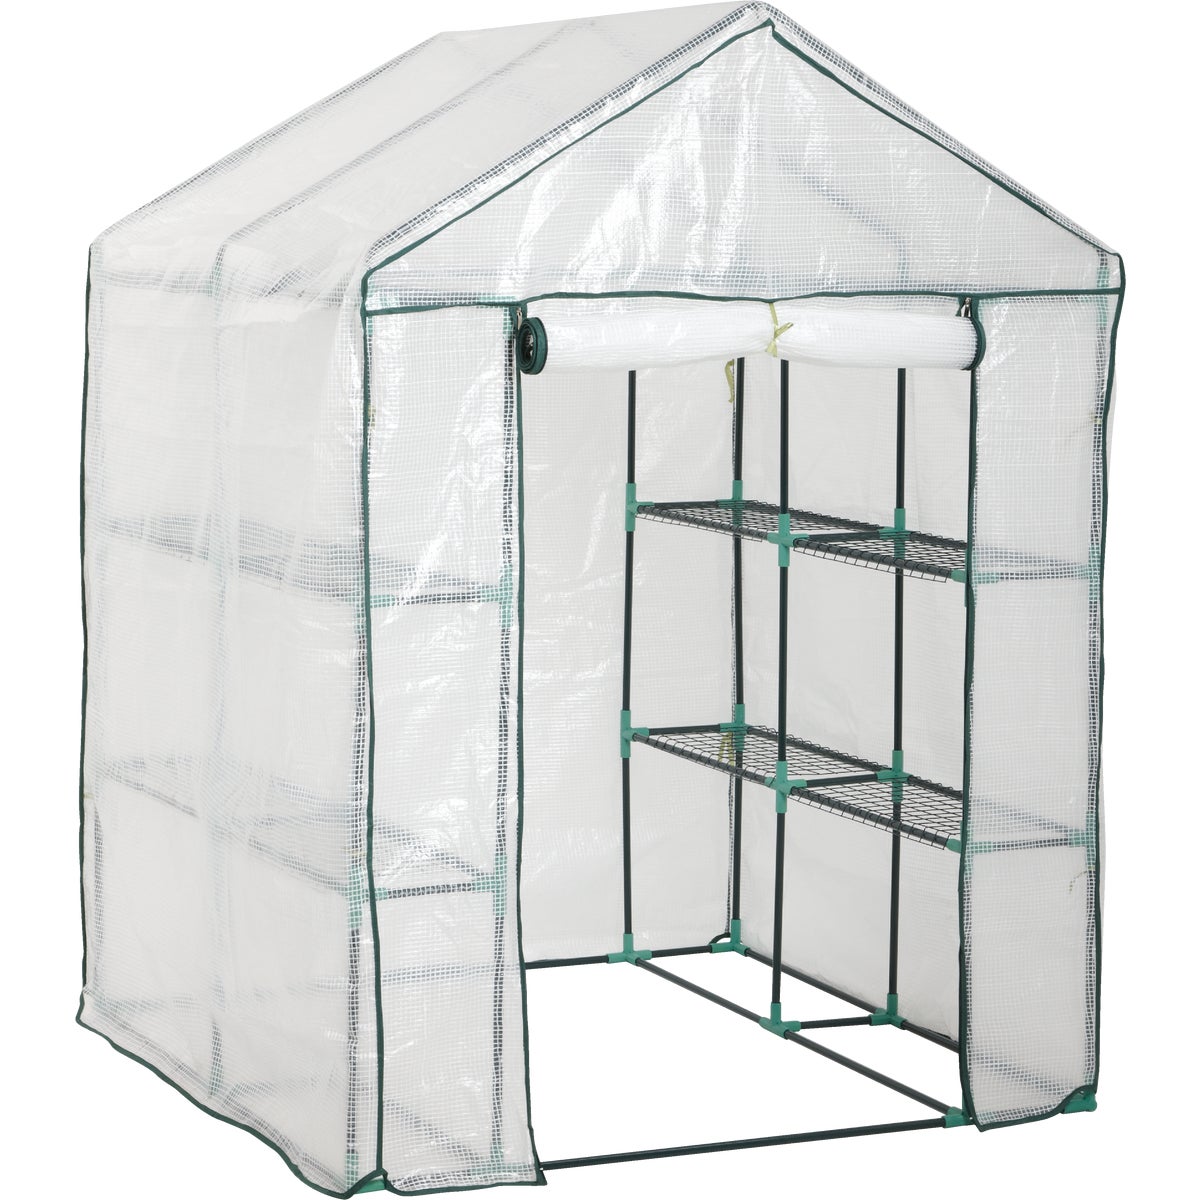 Item 701487, Ideal for protecting and growing seeds, seedlings and young plants.